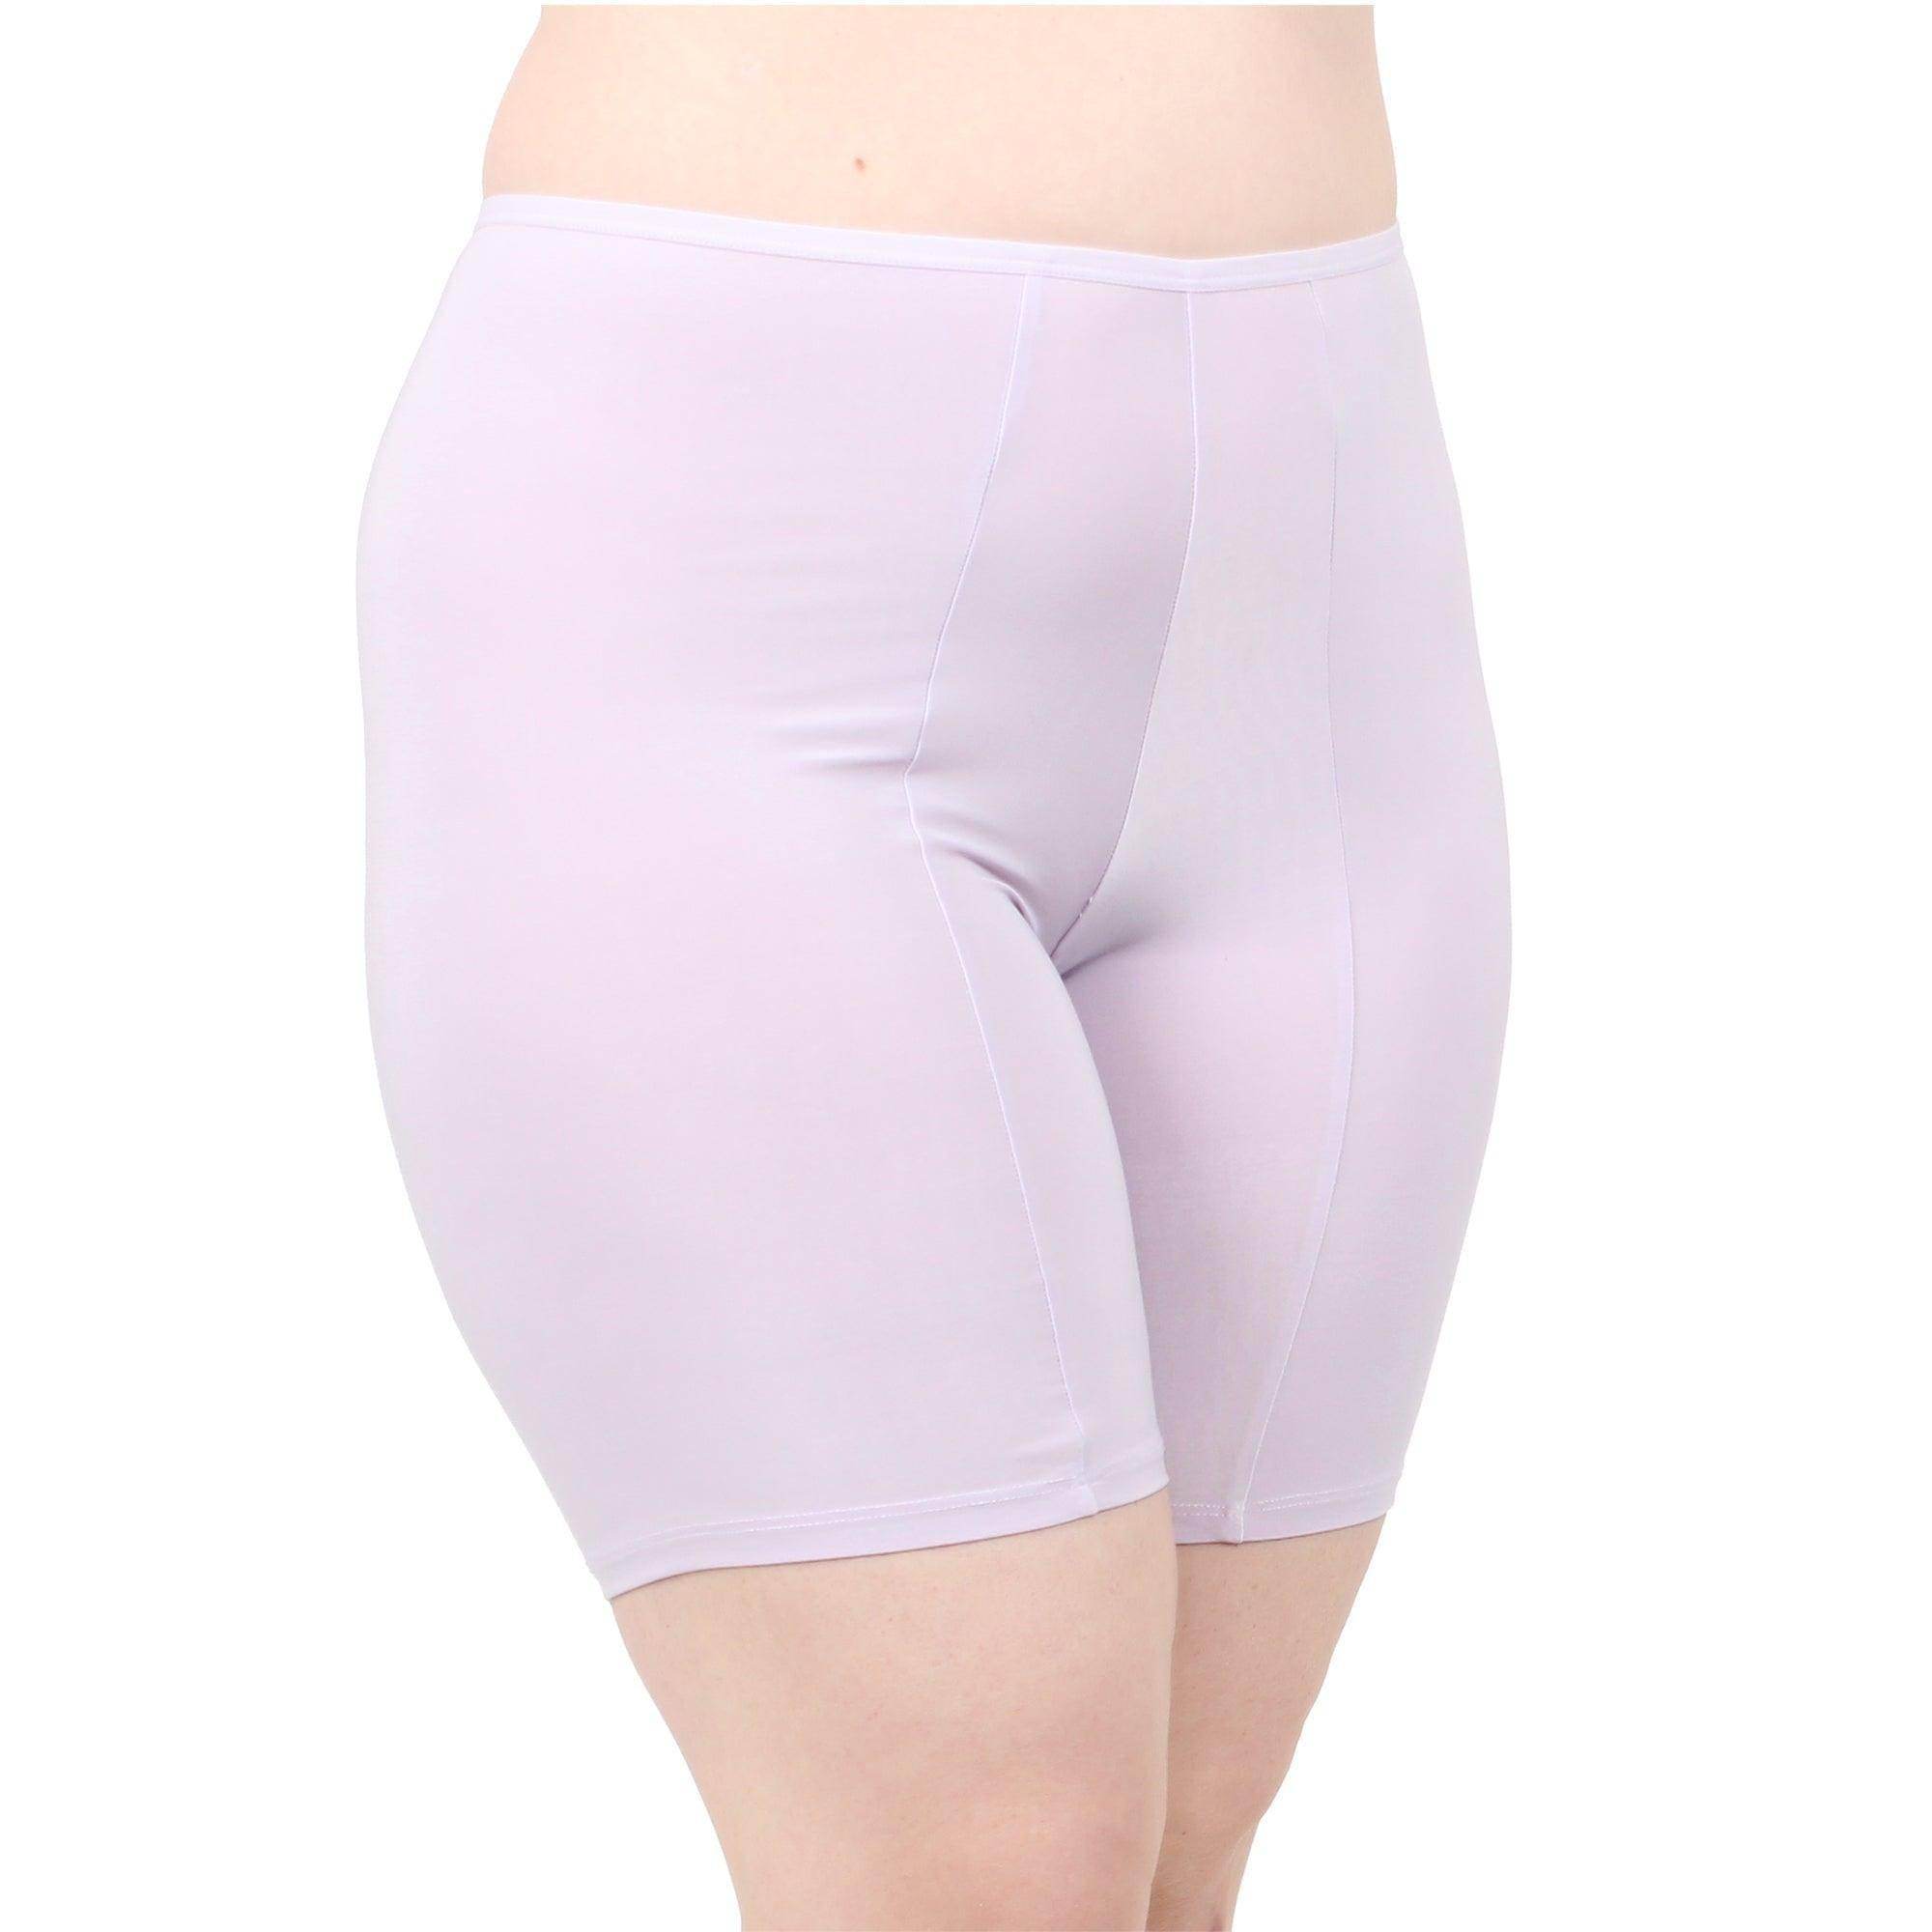 Women Plus Size Safety Pants Slip Shorts Soft Breathable for Under